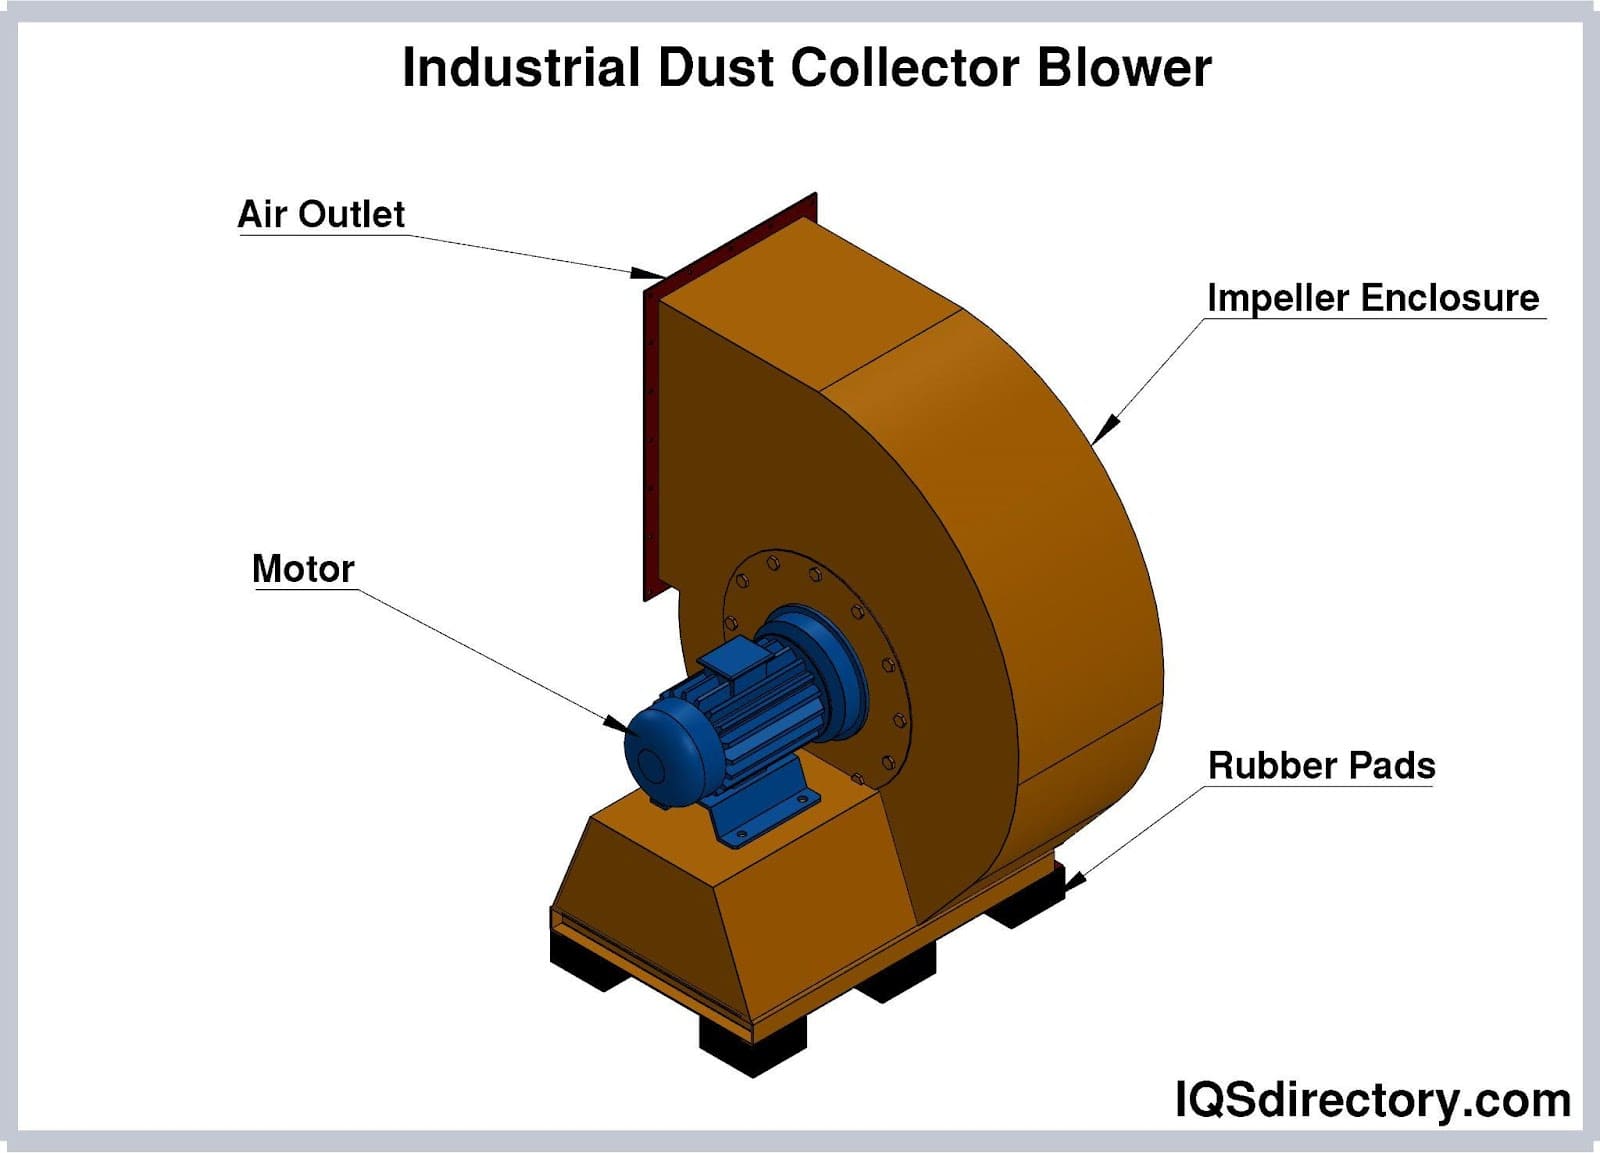 Industrial Dust Collector Blower